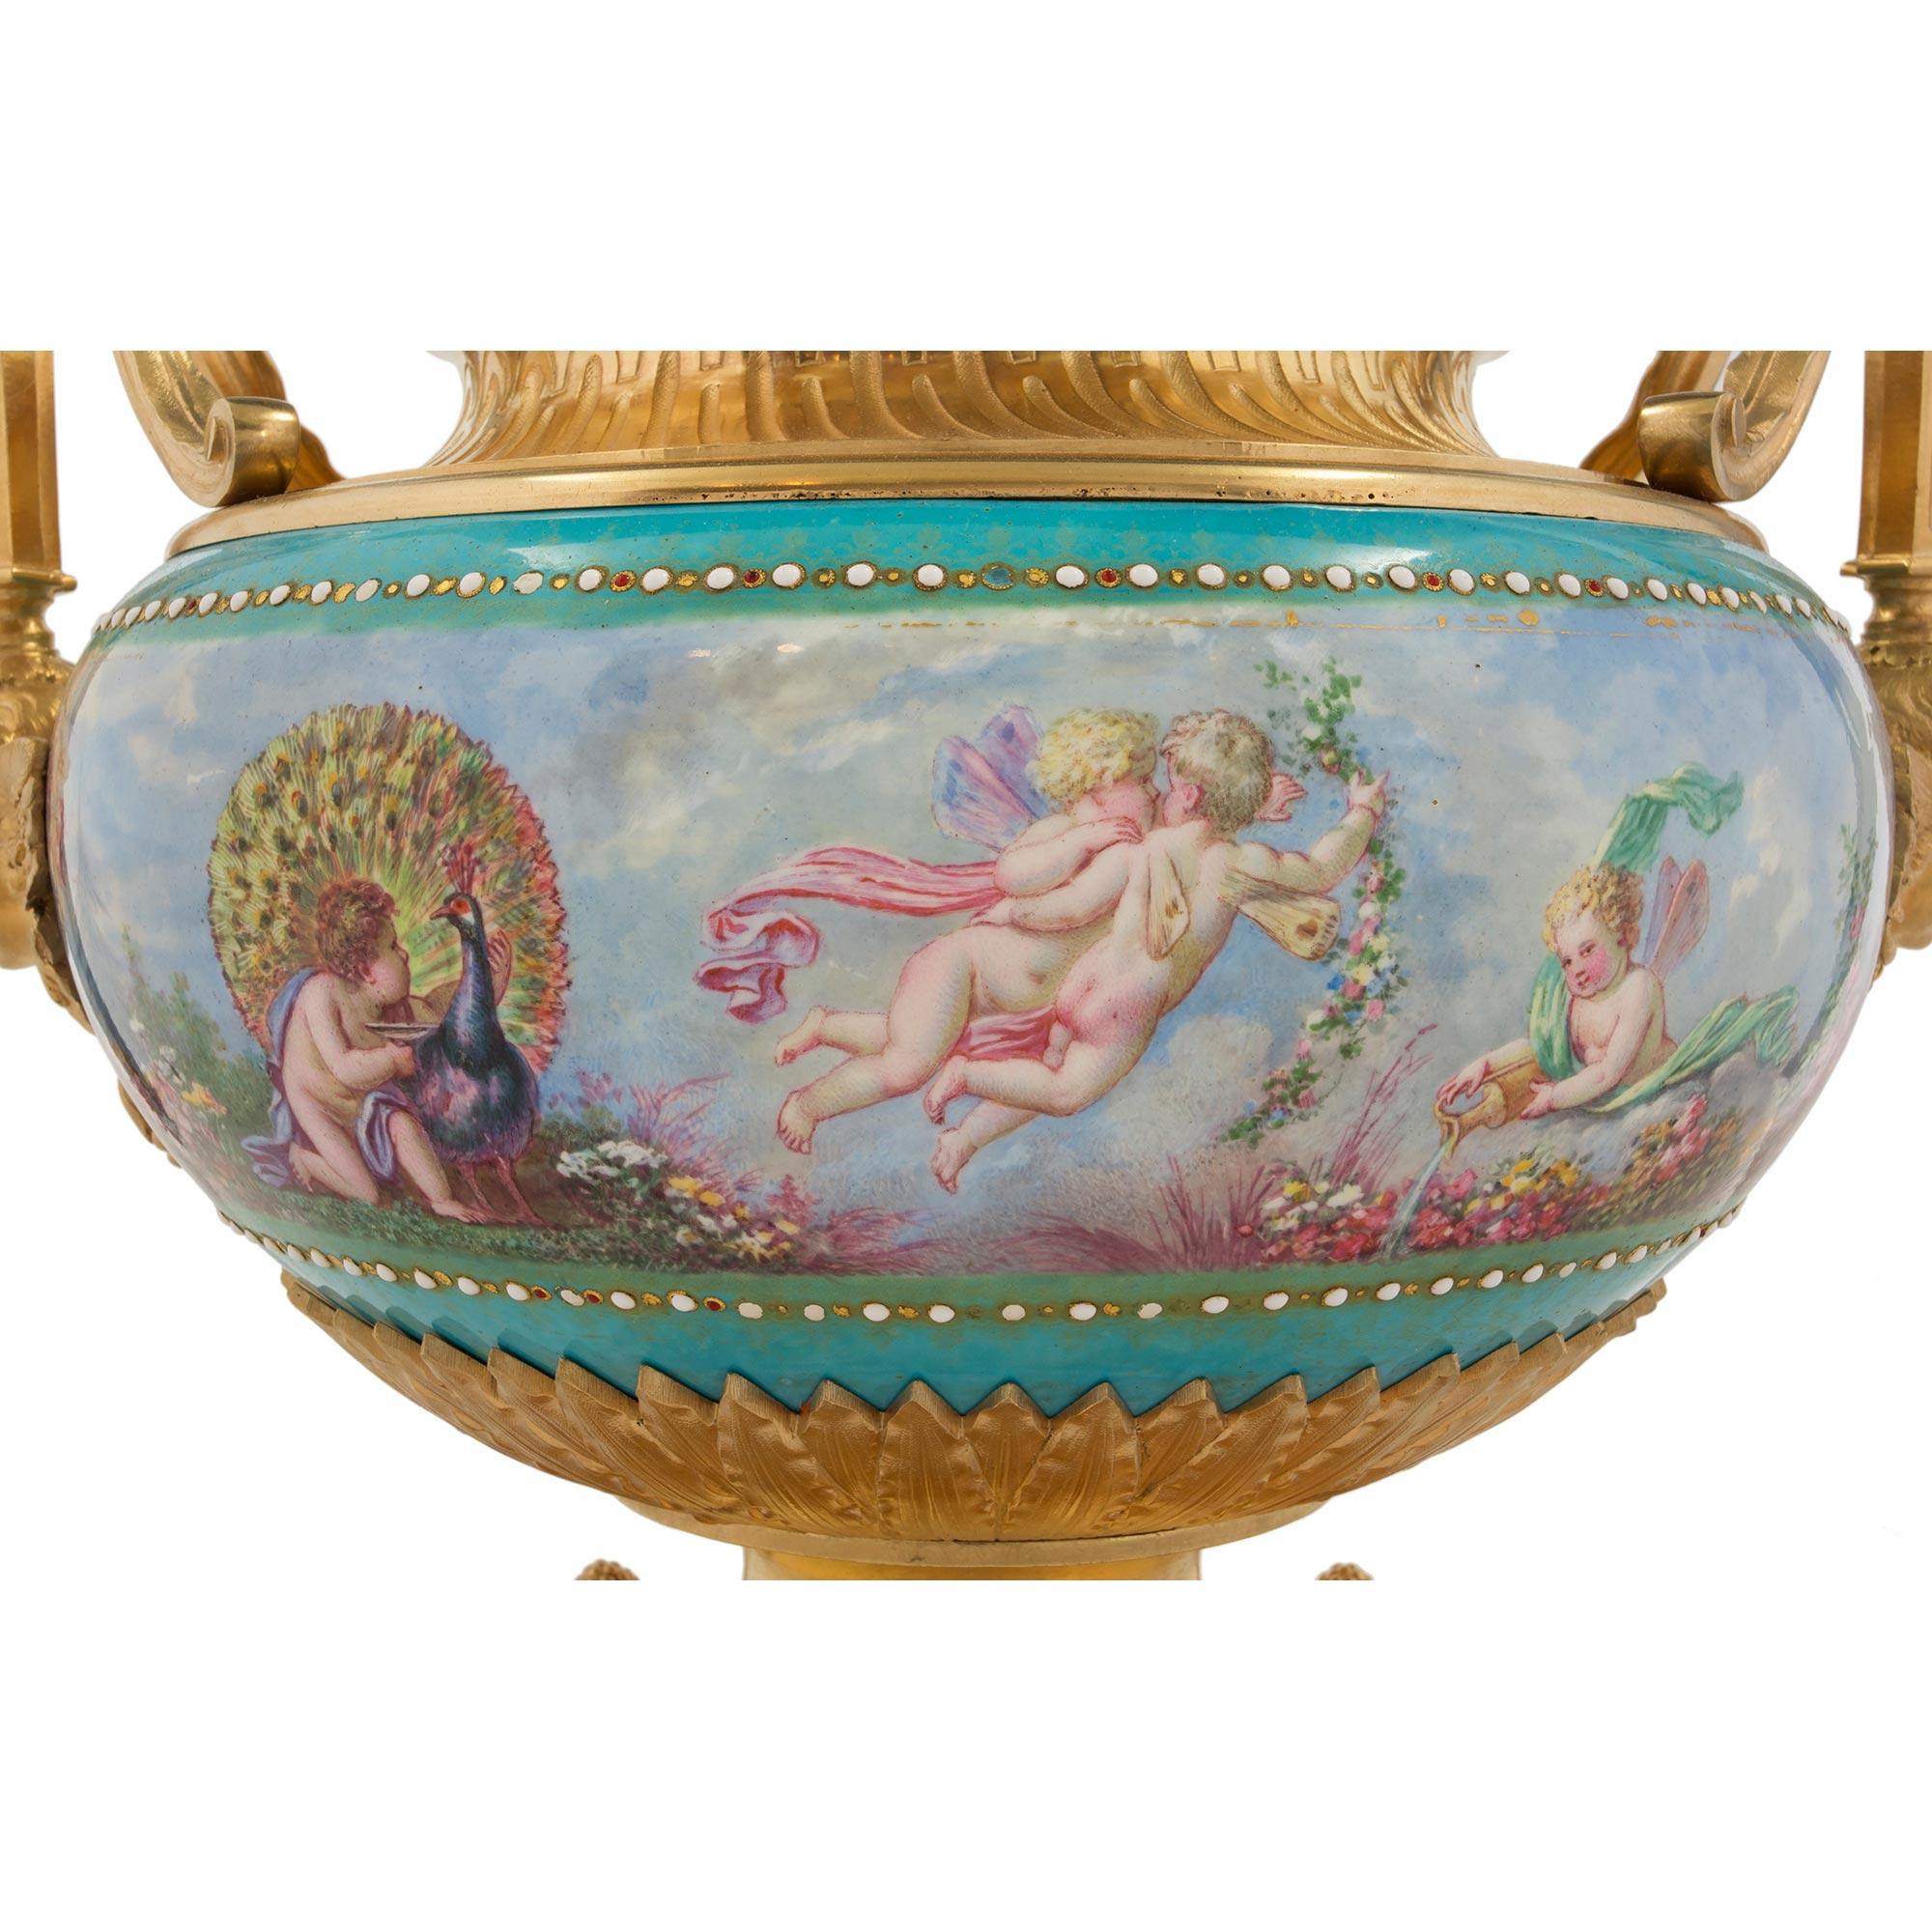 French 19th Century Louis XVI Style Ormolu and Enameled Porcelain Centerpiece For Sale 4